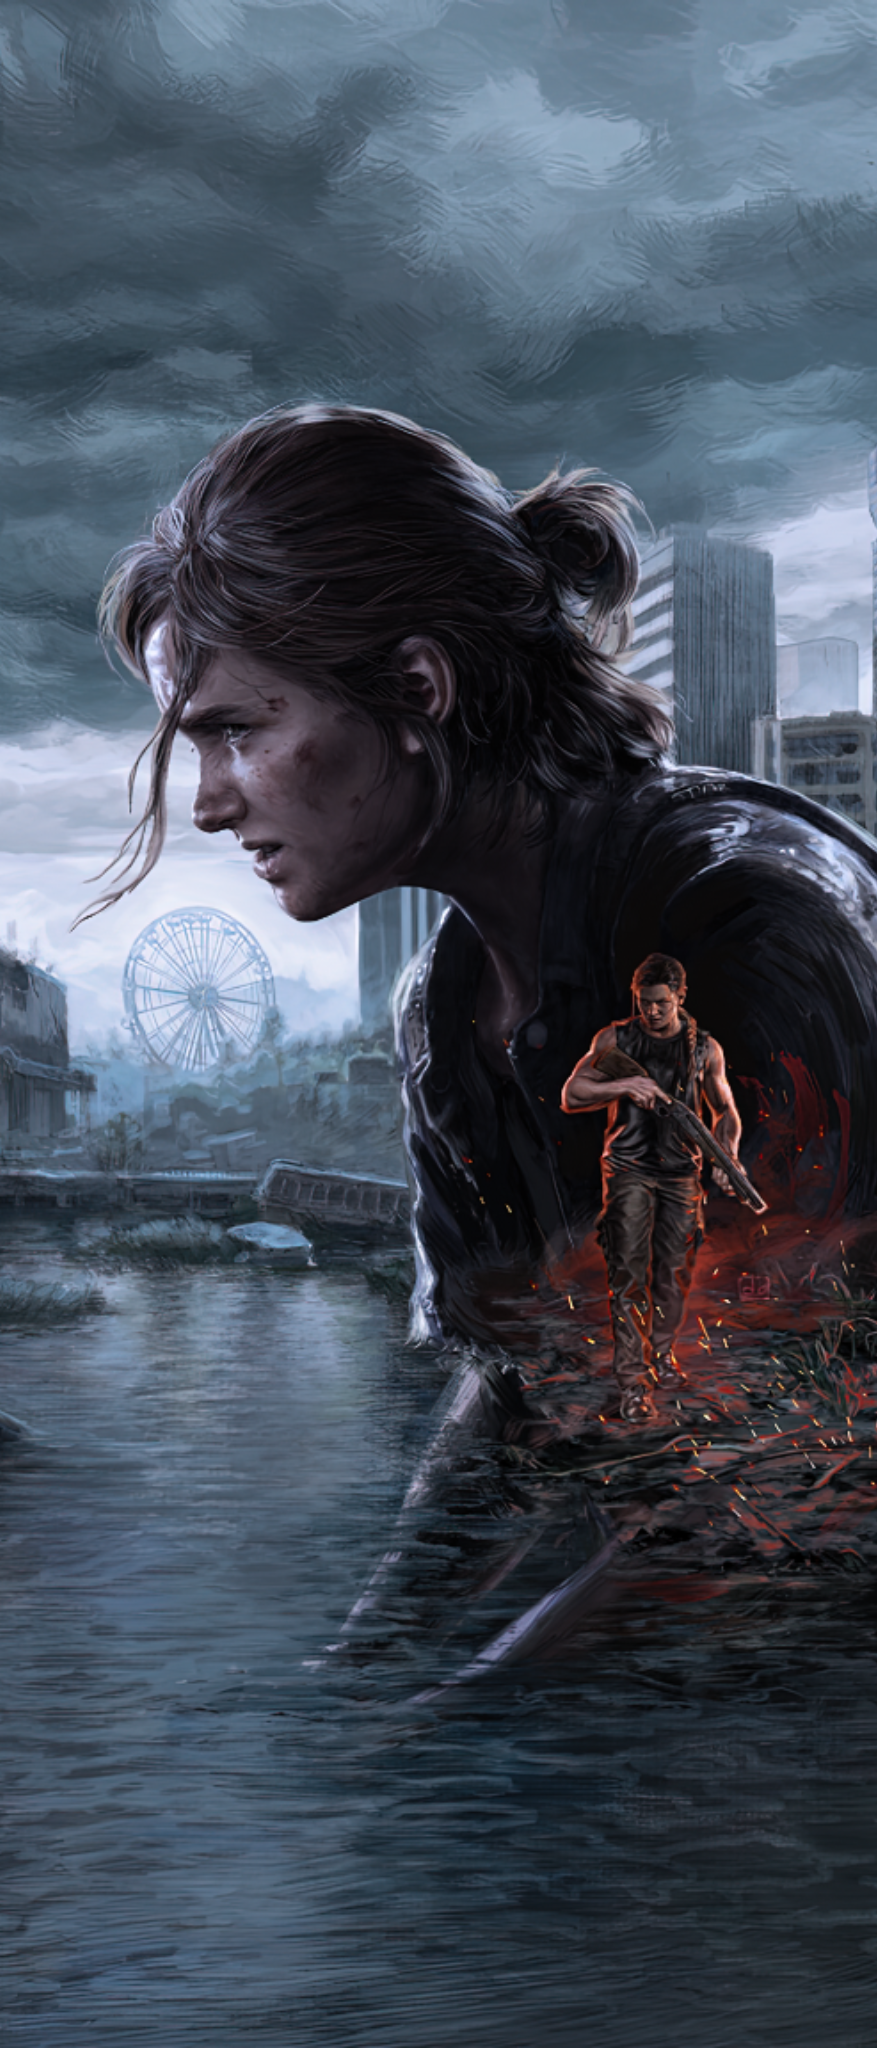 The Last of Us Part II] [ ] Mobile edit made by combining the two